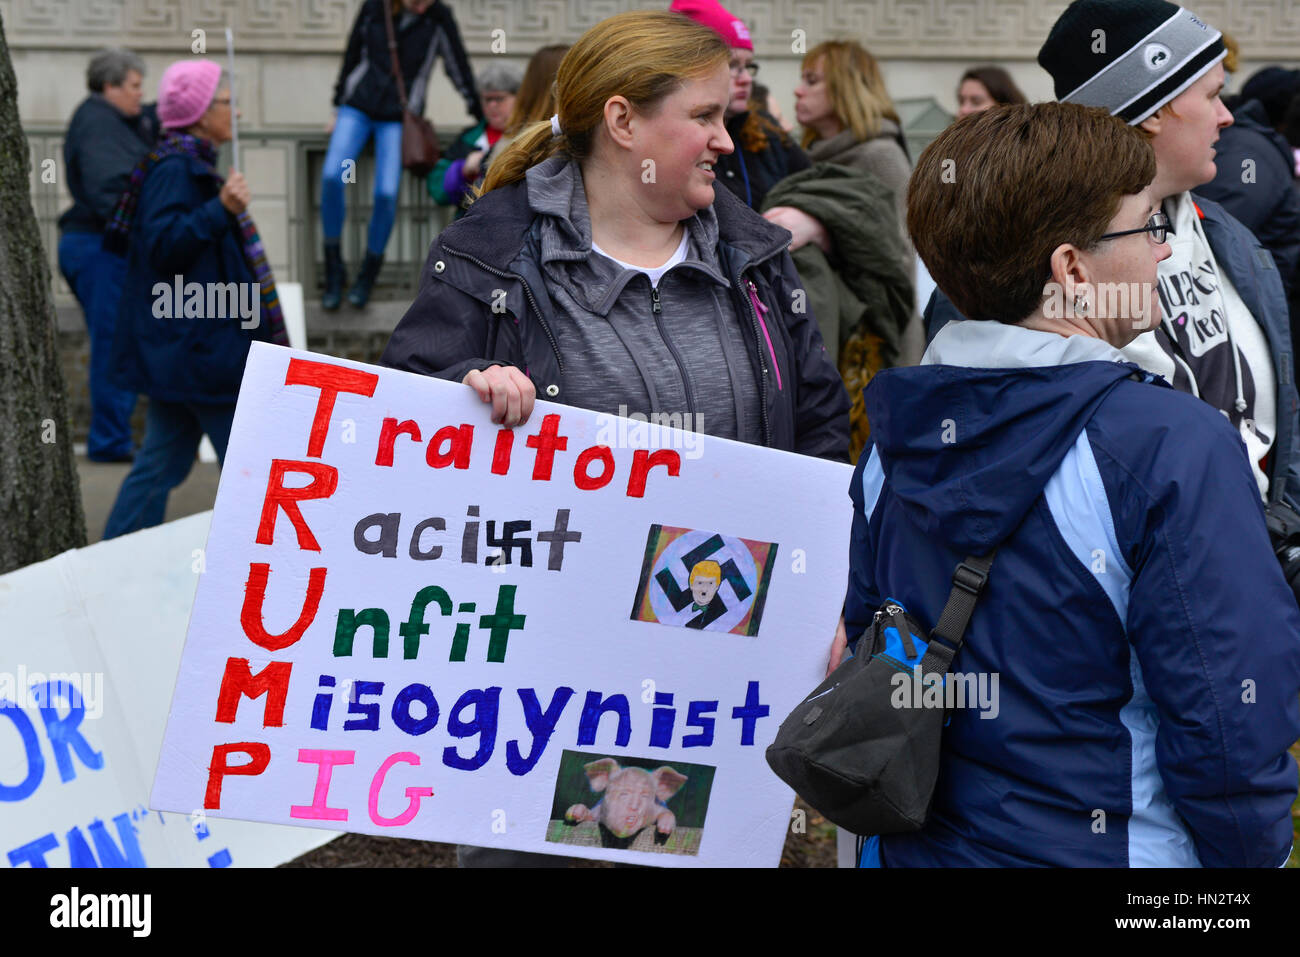 Woman in the demonstration at the Women's March on Washington, DC, holding sign reading 'Traitor, Racist, Unfit, Misogynist, Pig spells TRUMP Stock Photo